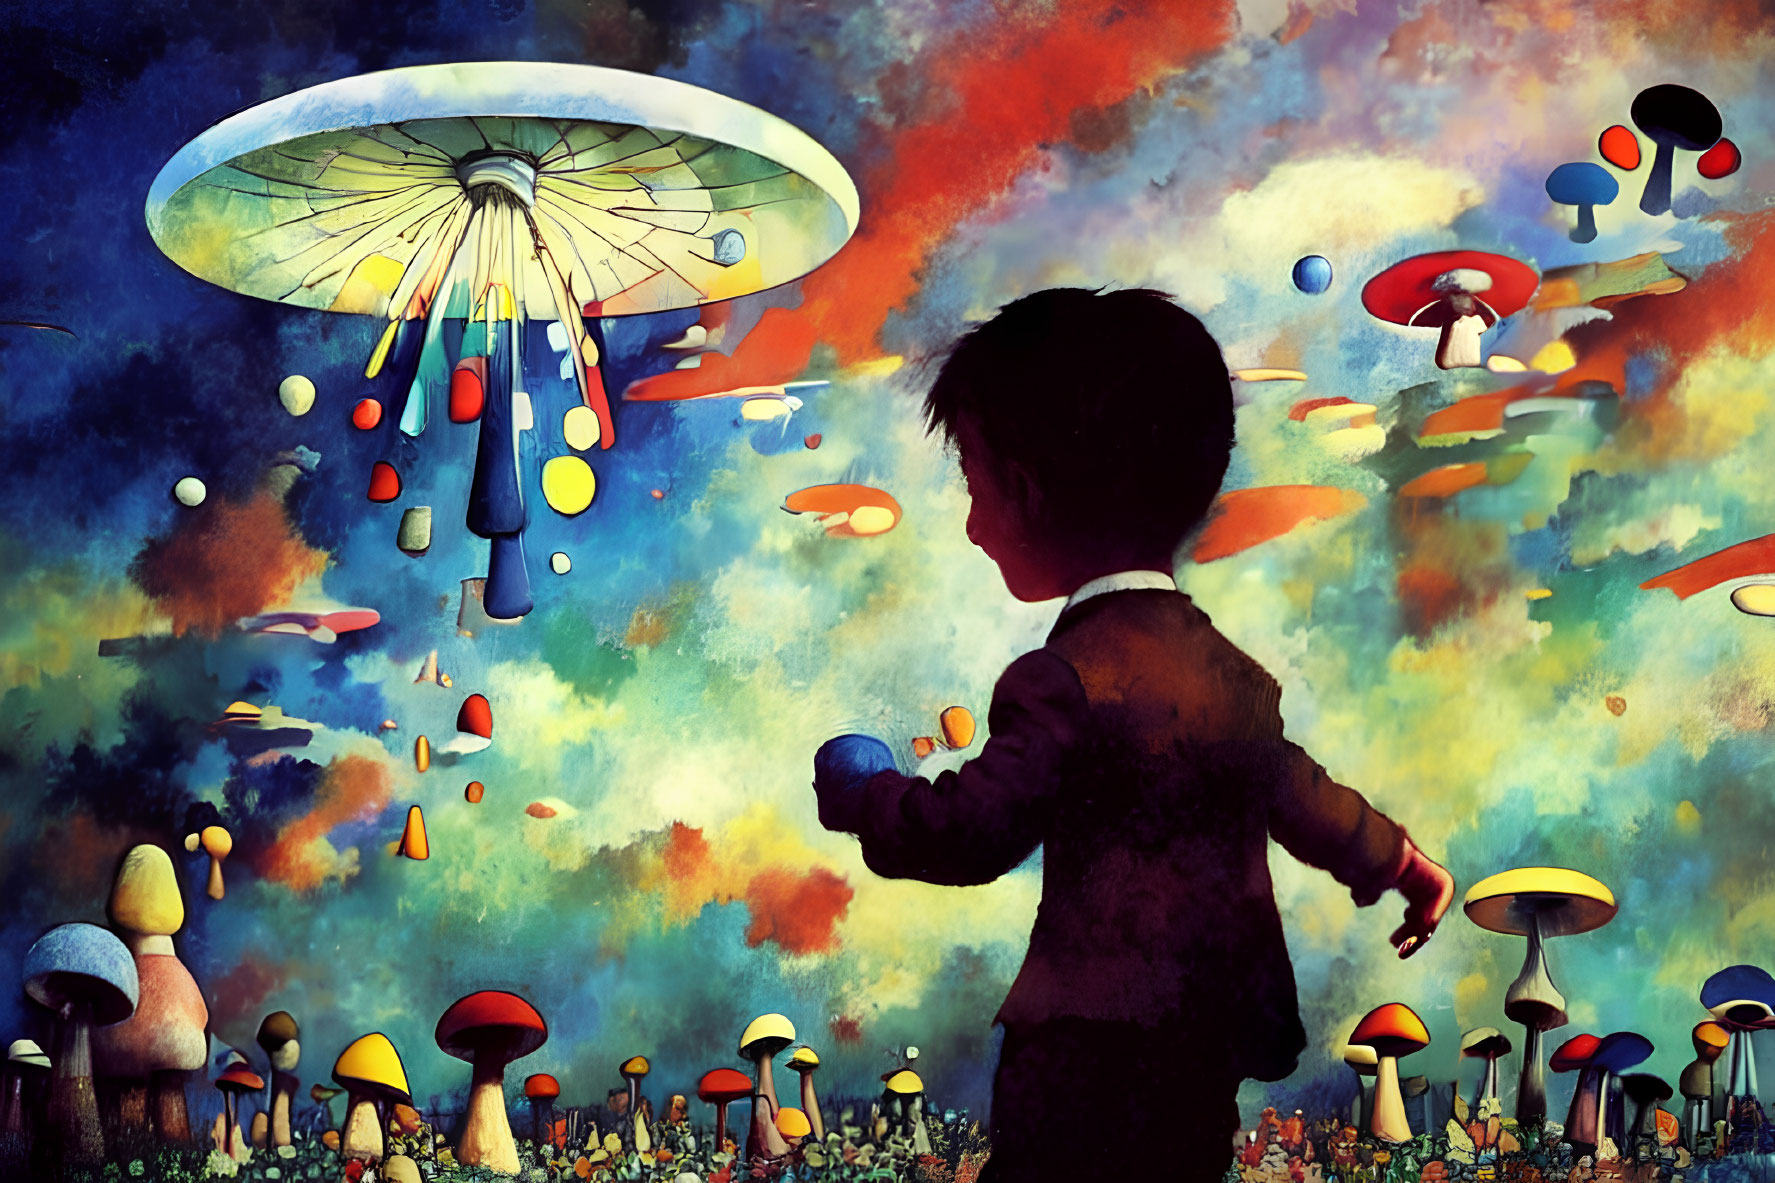 Silhouetted child surrounded by colorful mushrooms and flying saucers in twilight scene